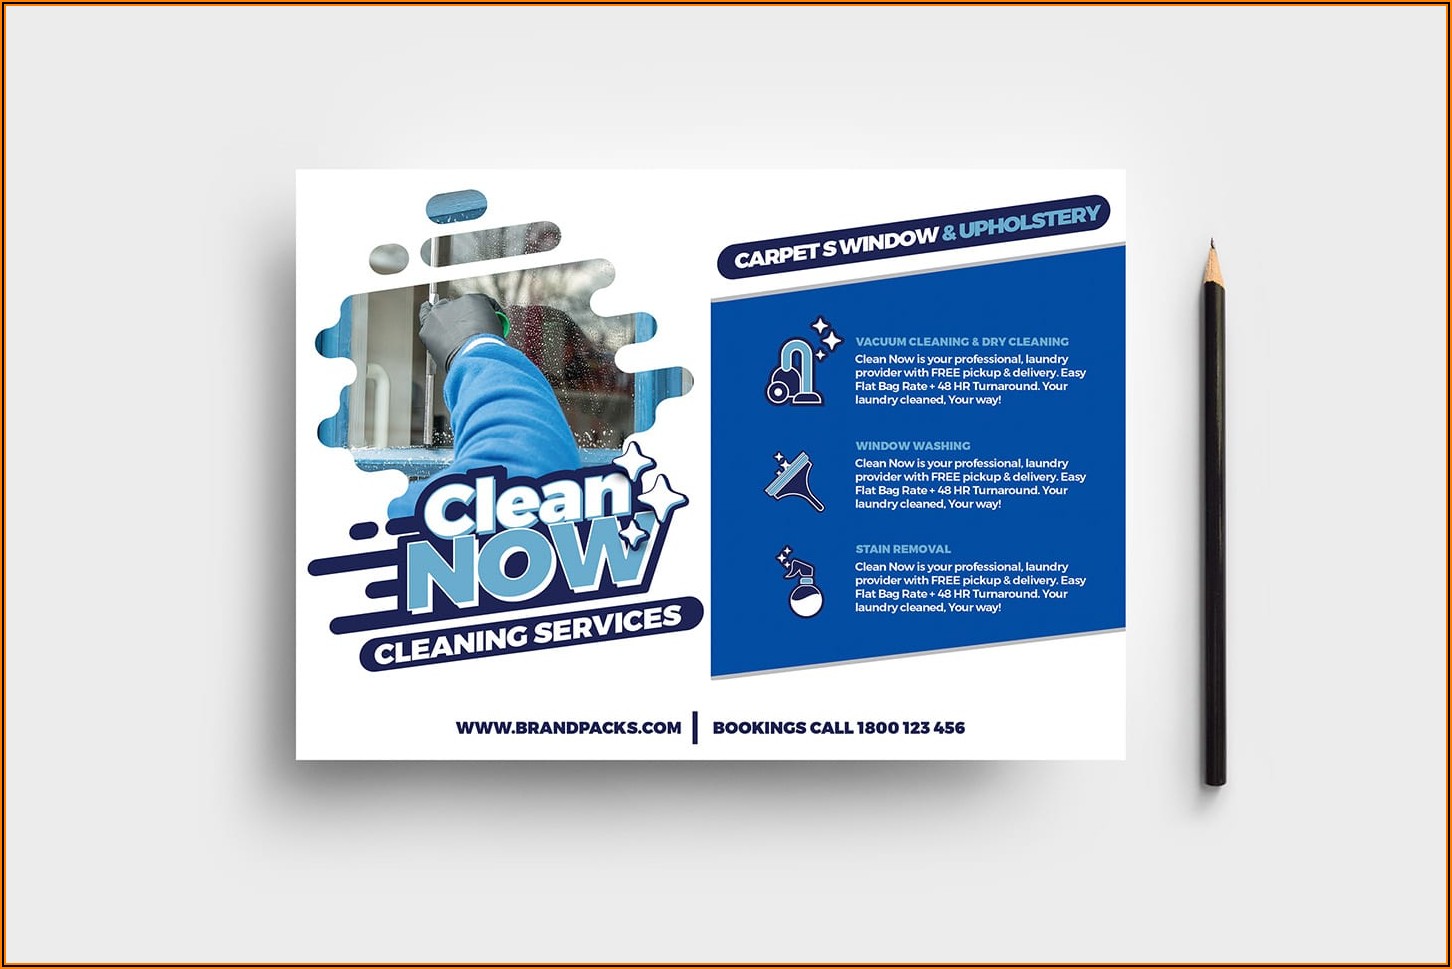 Free Cleaning Service Brochure Templates